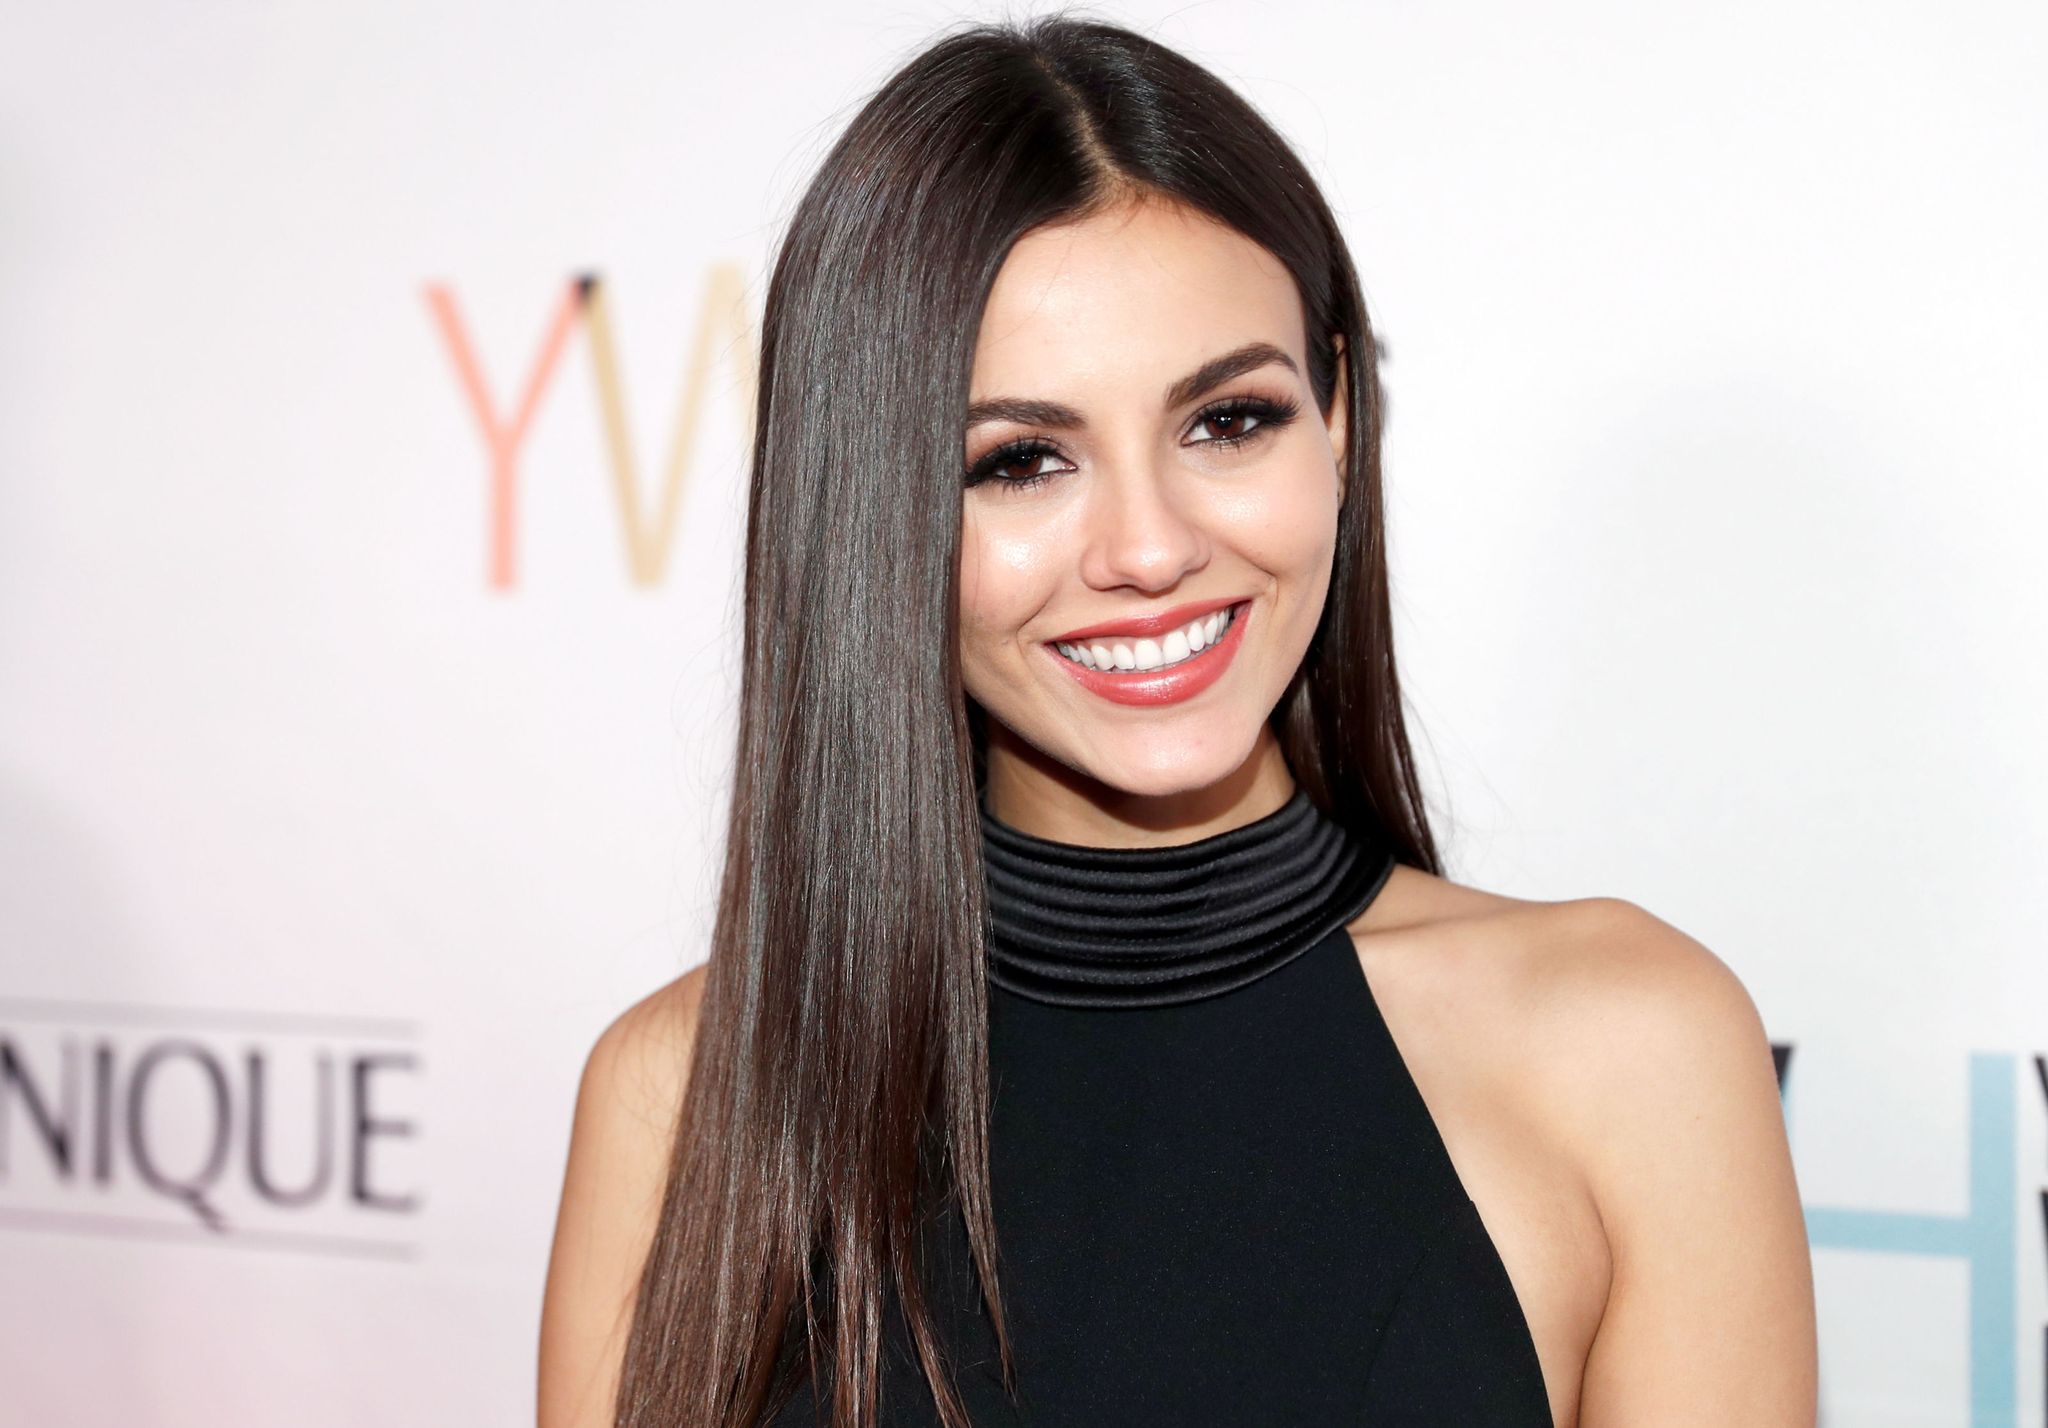 Victoria Justice wearing a black outfit